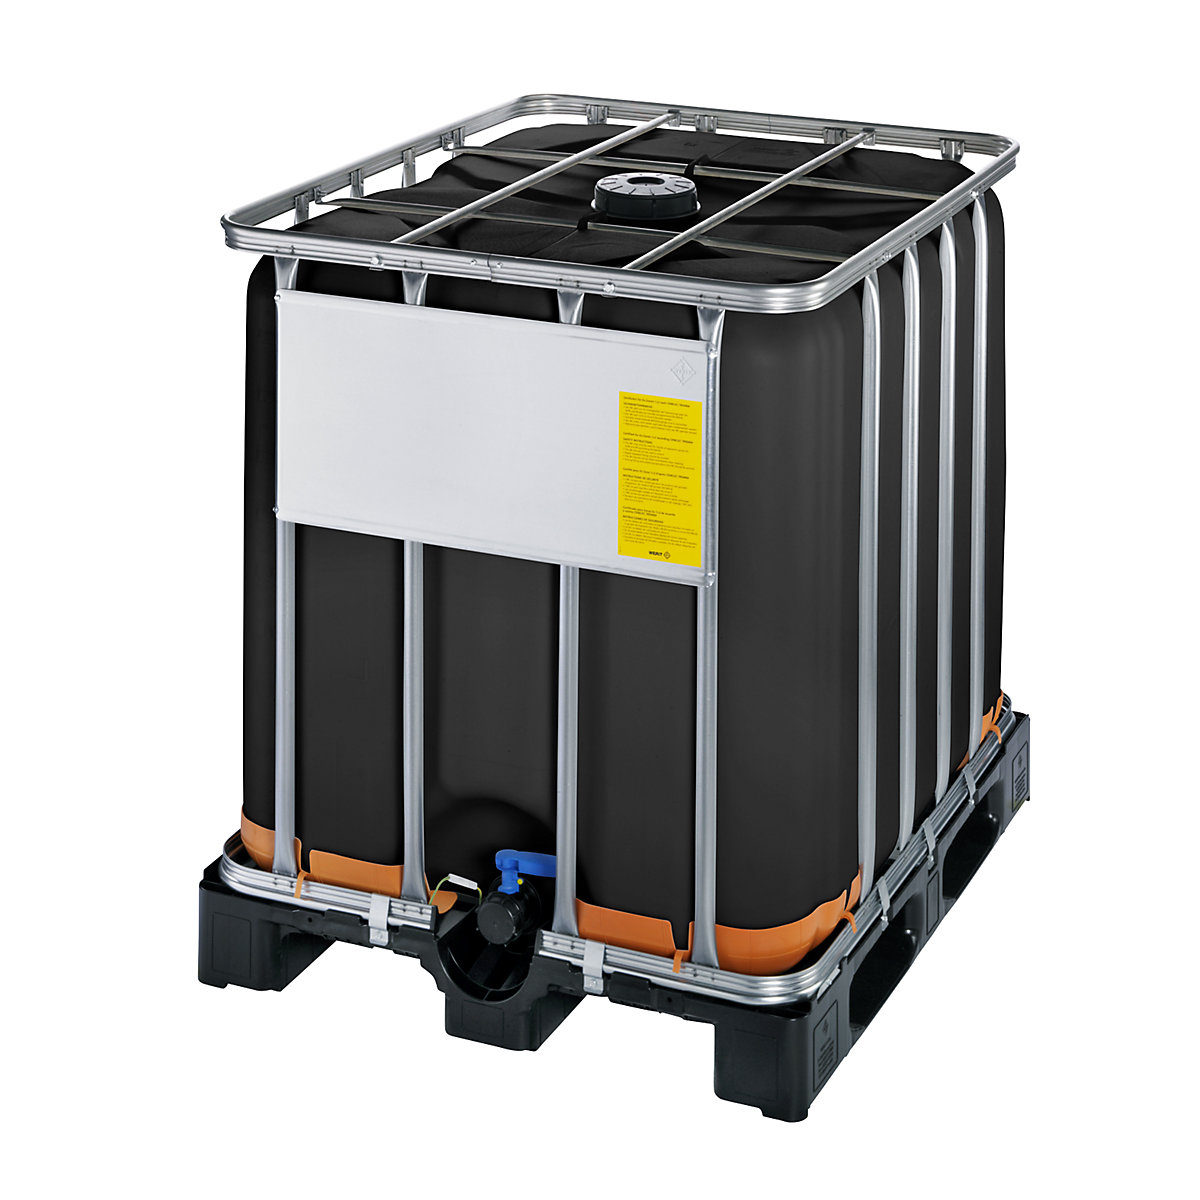 IBC container with UV protection, UN approval